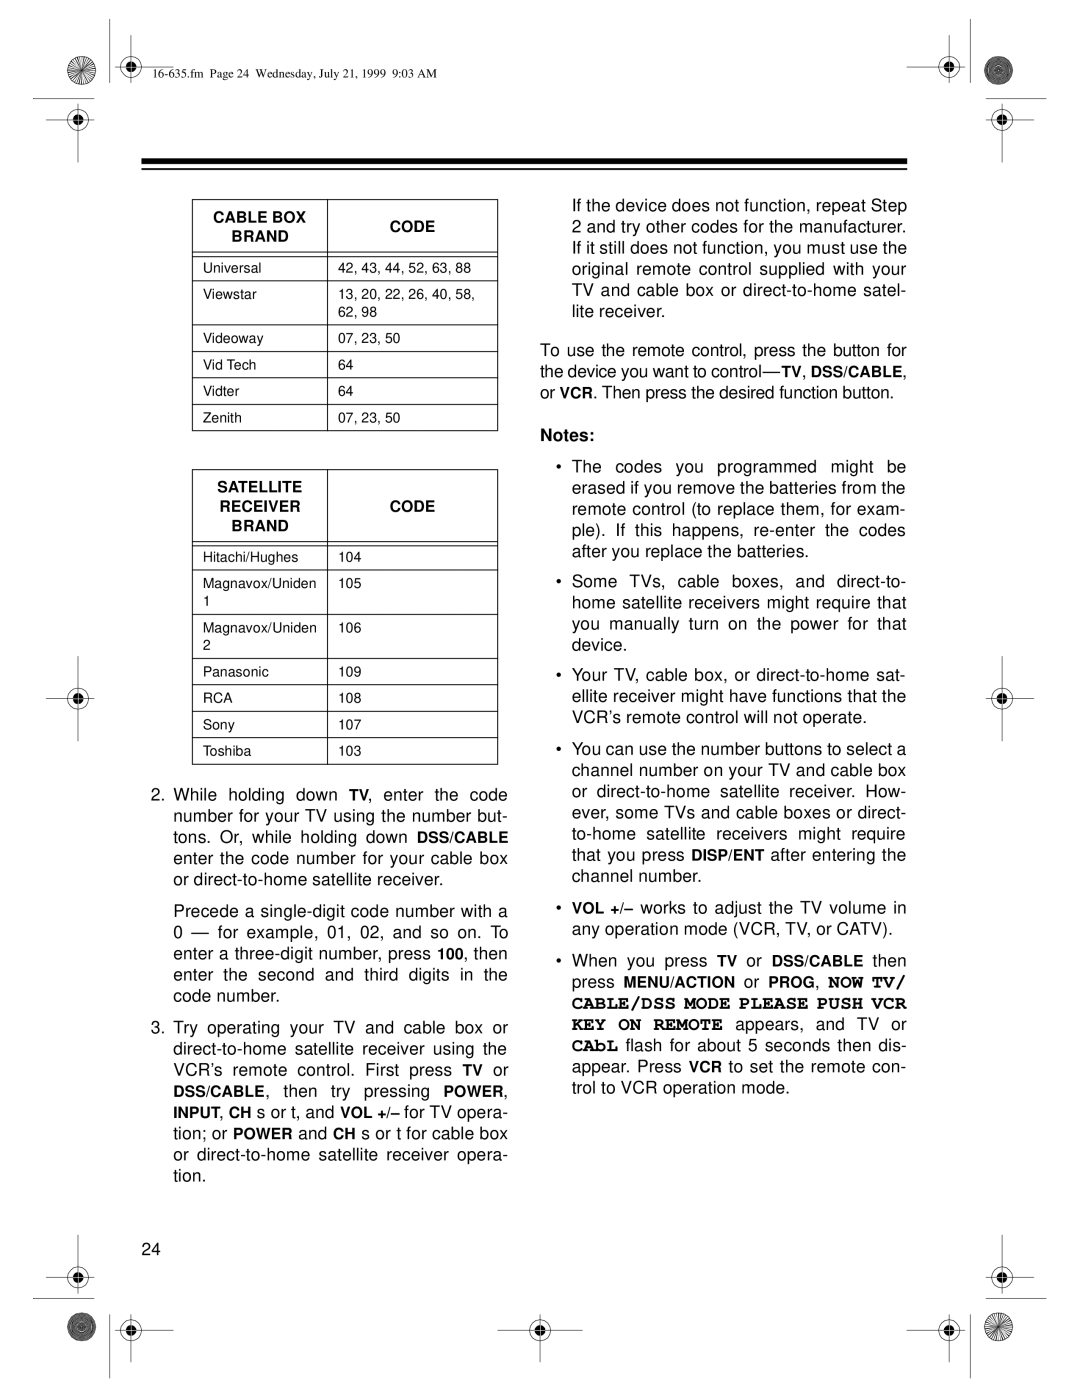 Radio Shack 66 owner manual fm Page 24 Wednesday, July 21, 1999 903 AM 